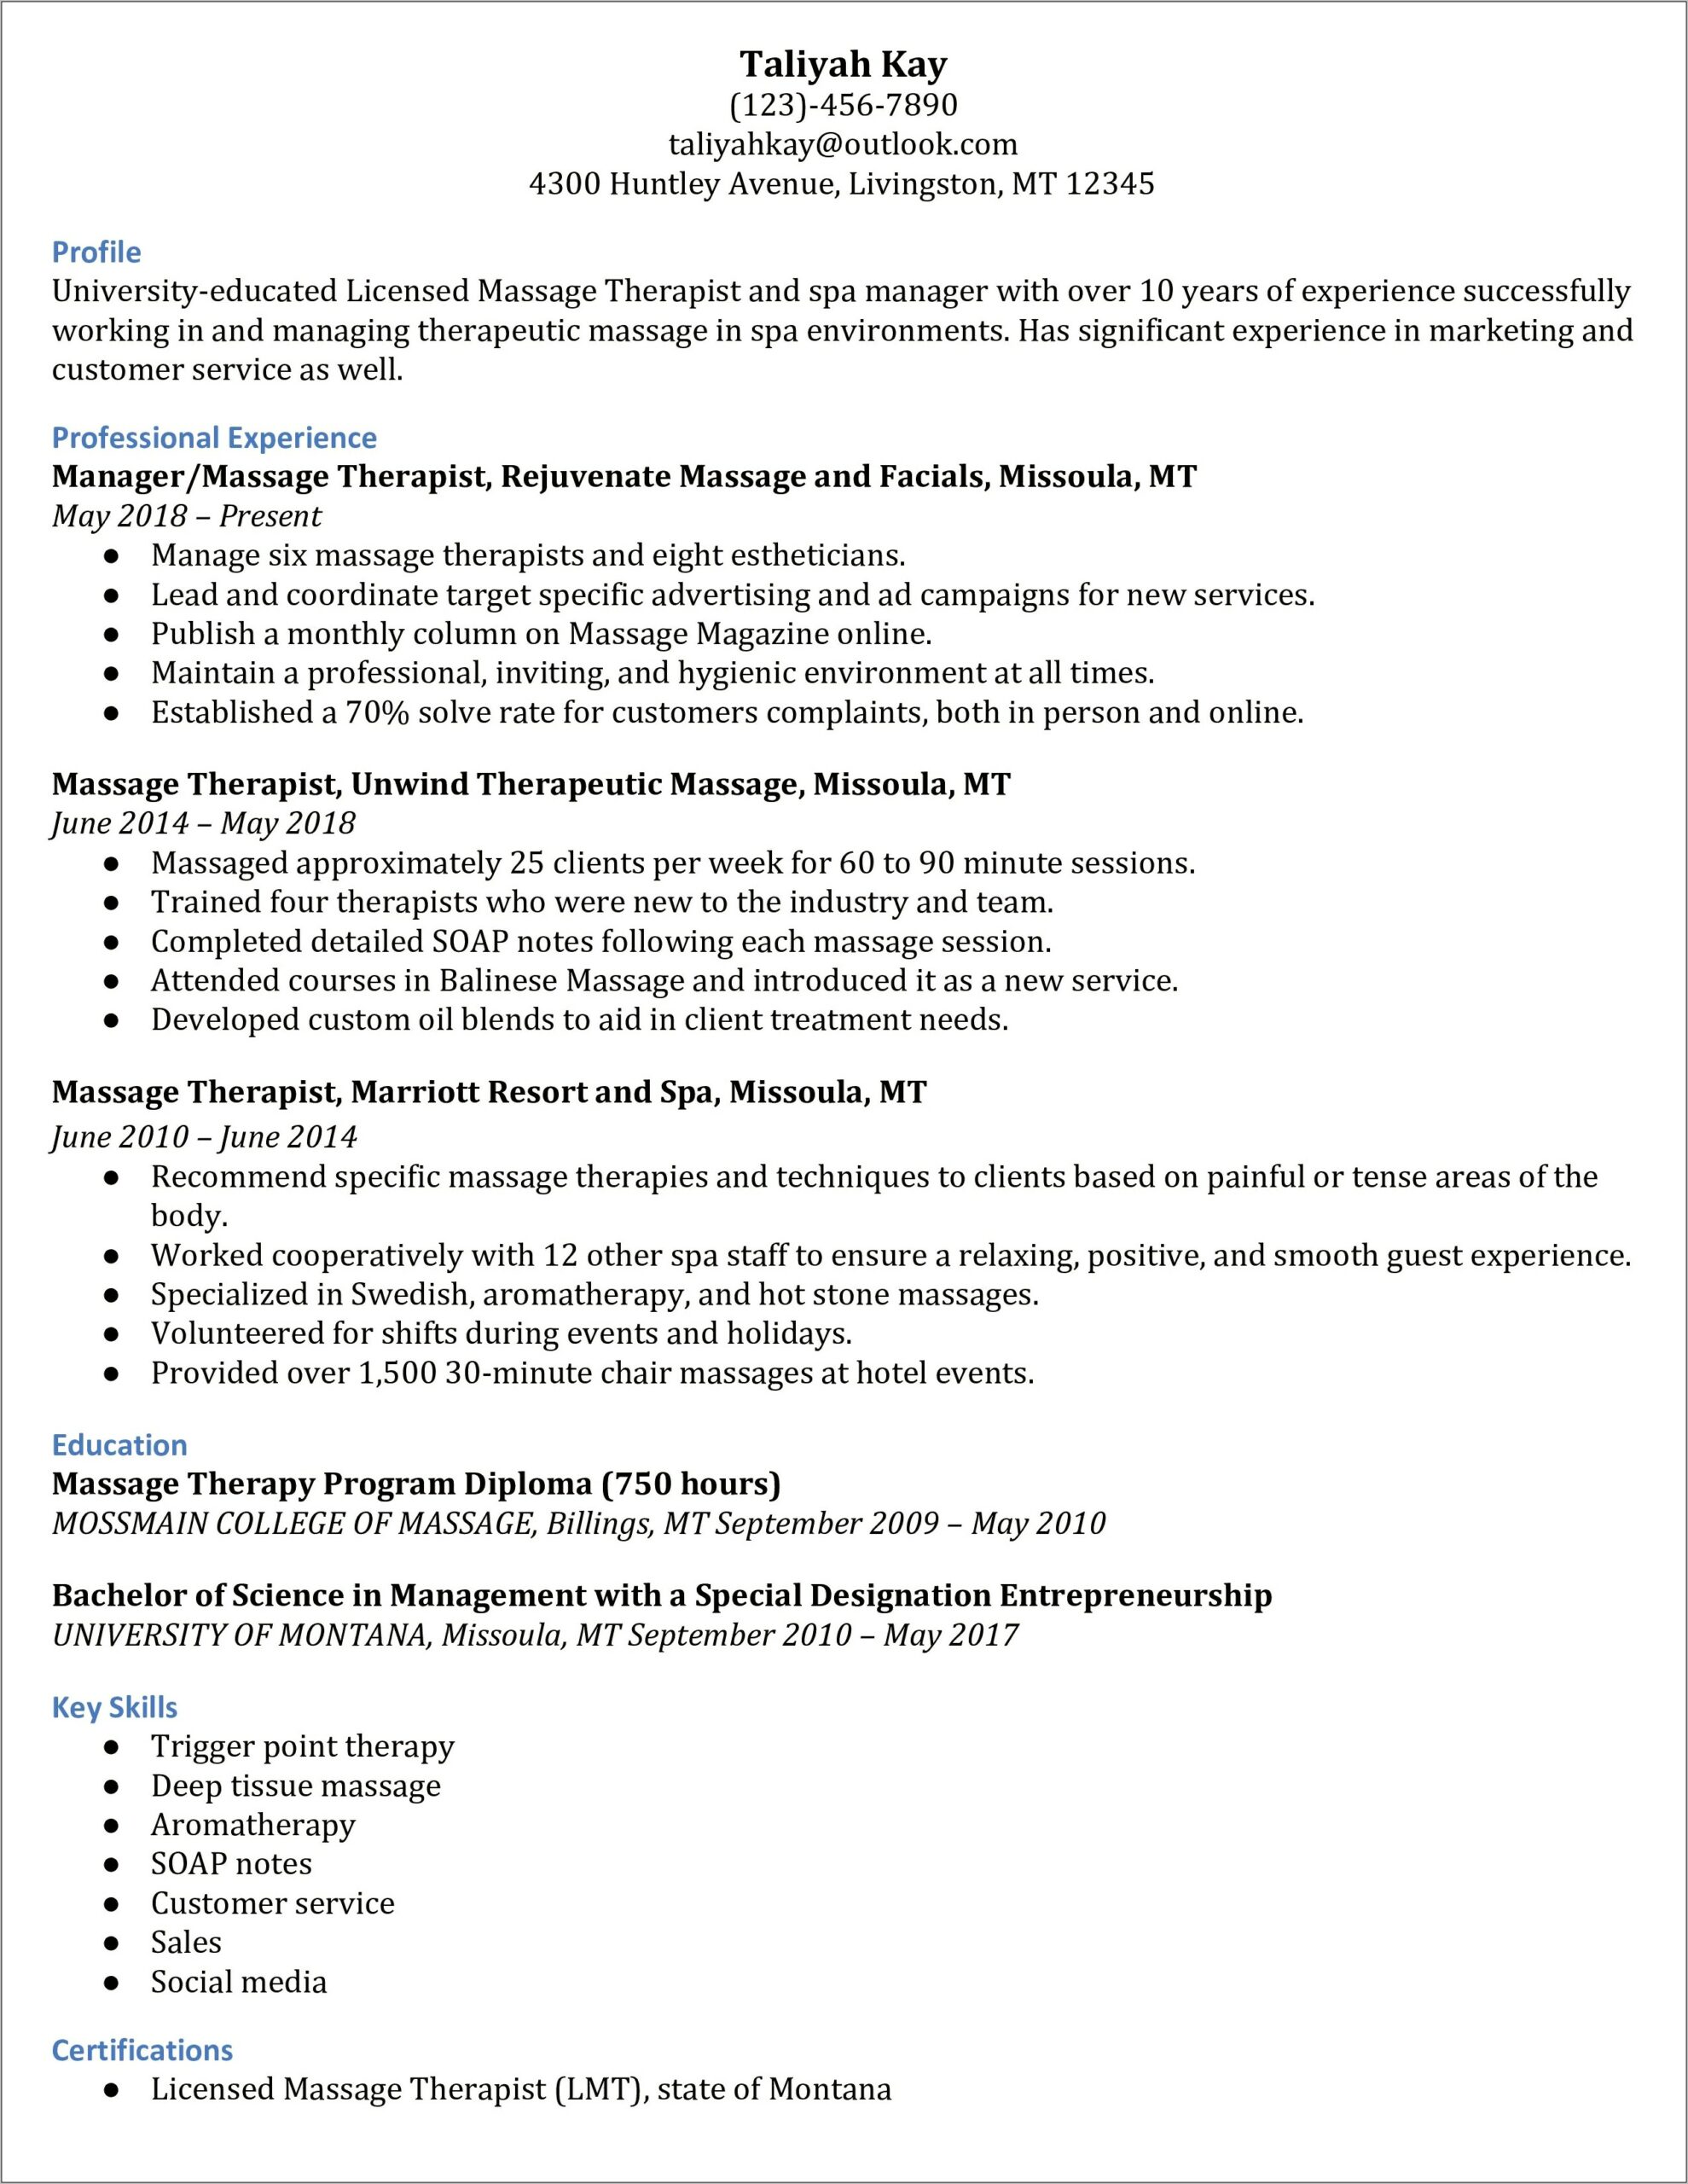 Sample Functional Resume For Massage Therapist